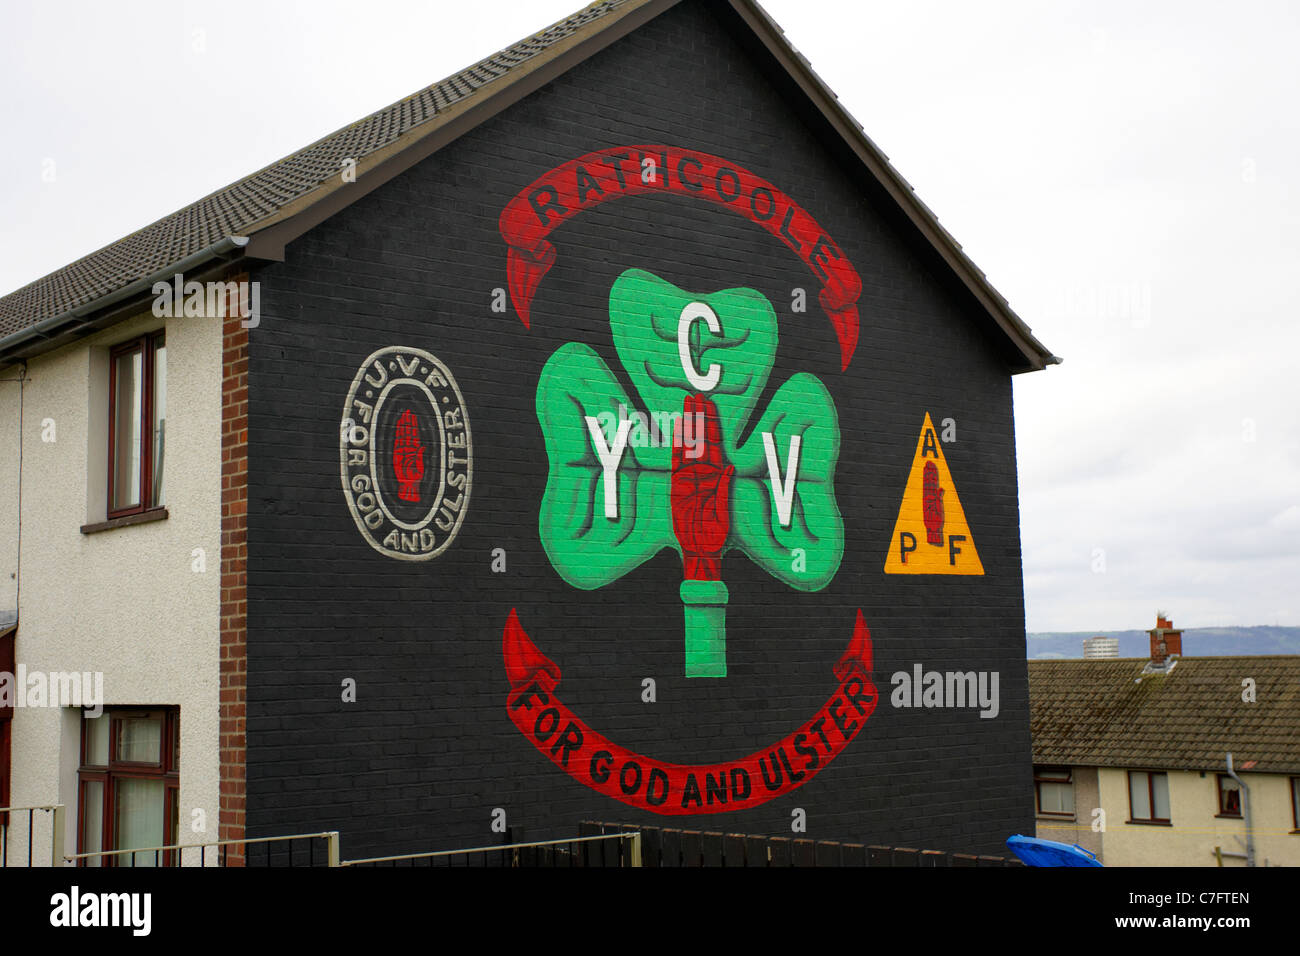 rathcoole ycv for god and ulster loyalist wall mural painting newtownabbey northern ireland Stock Photo